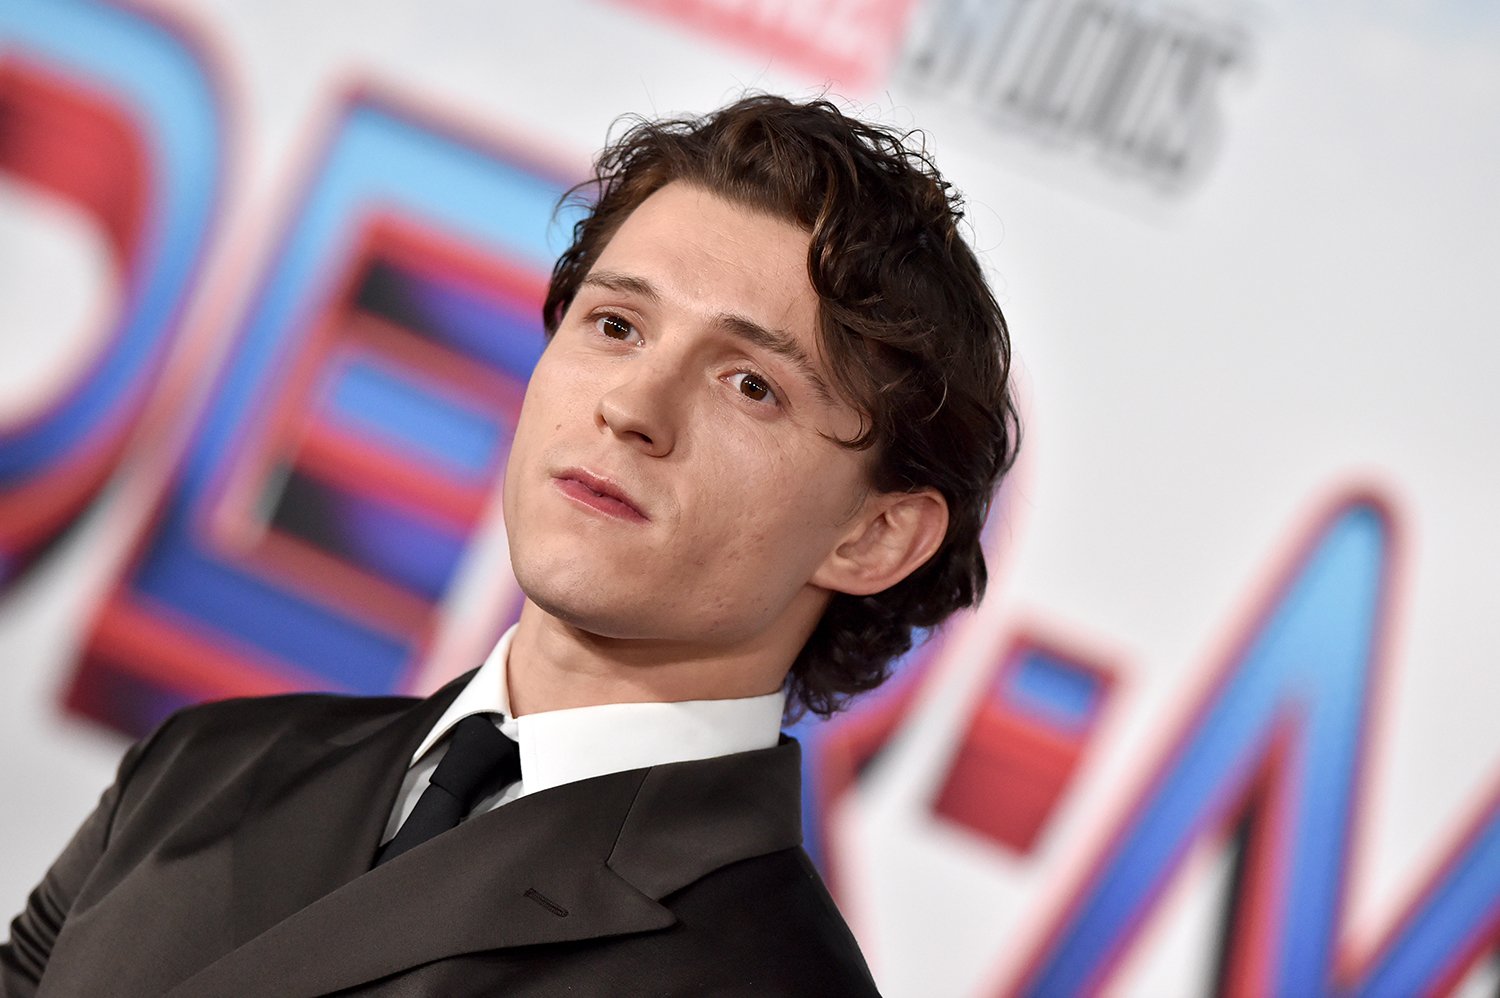 Tom Holland poses at the premiere for Spider-Man: No Way Home, which features fellow Spider-Man actors Andrew Garfield and Tobey Maguire